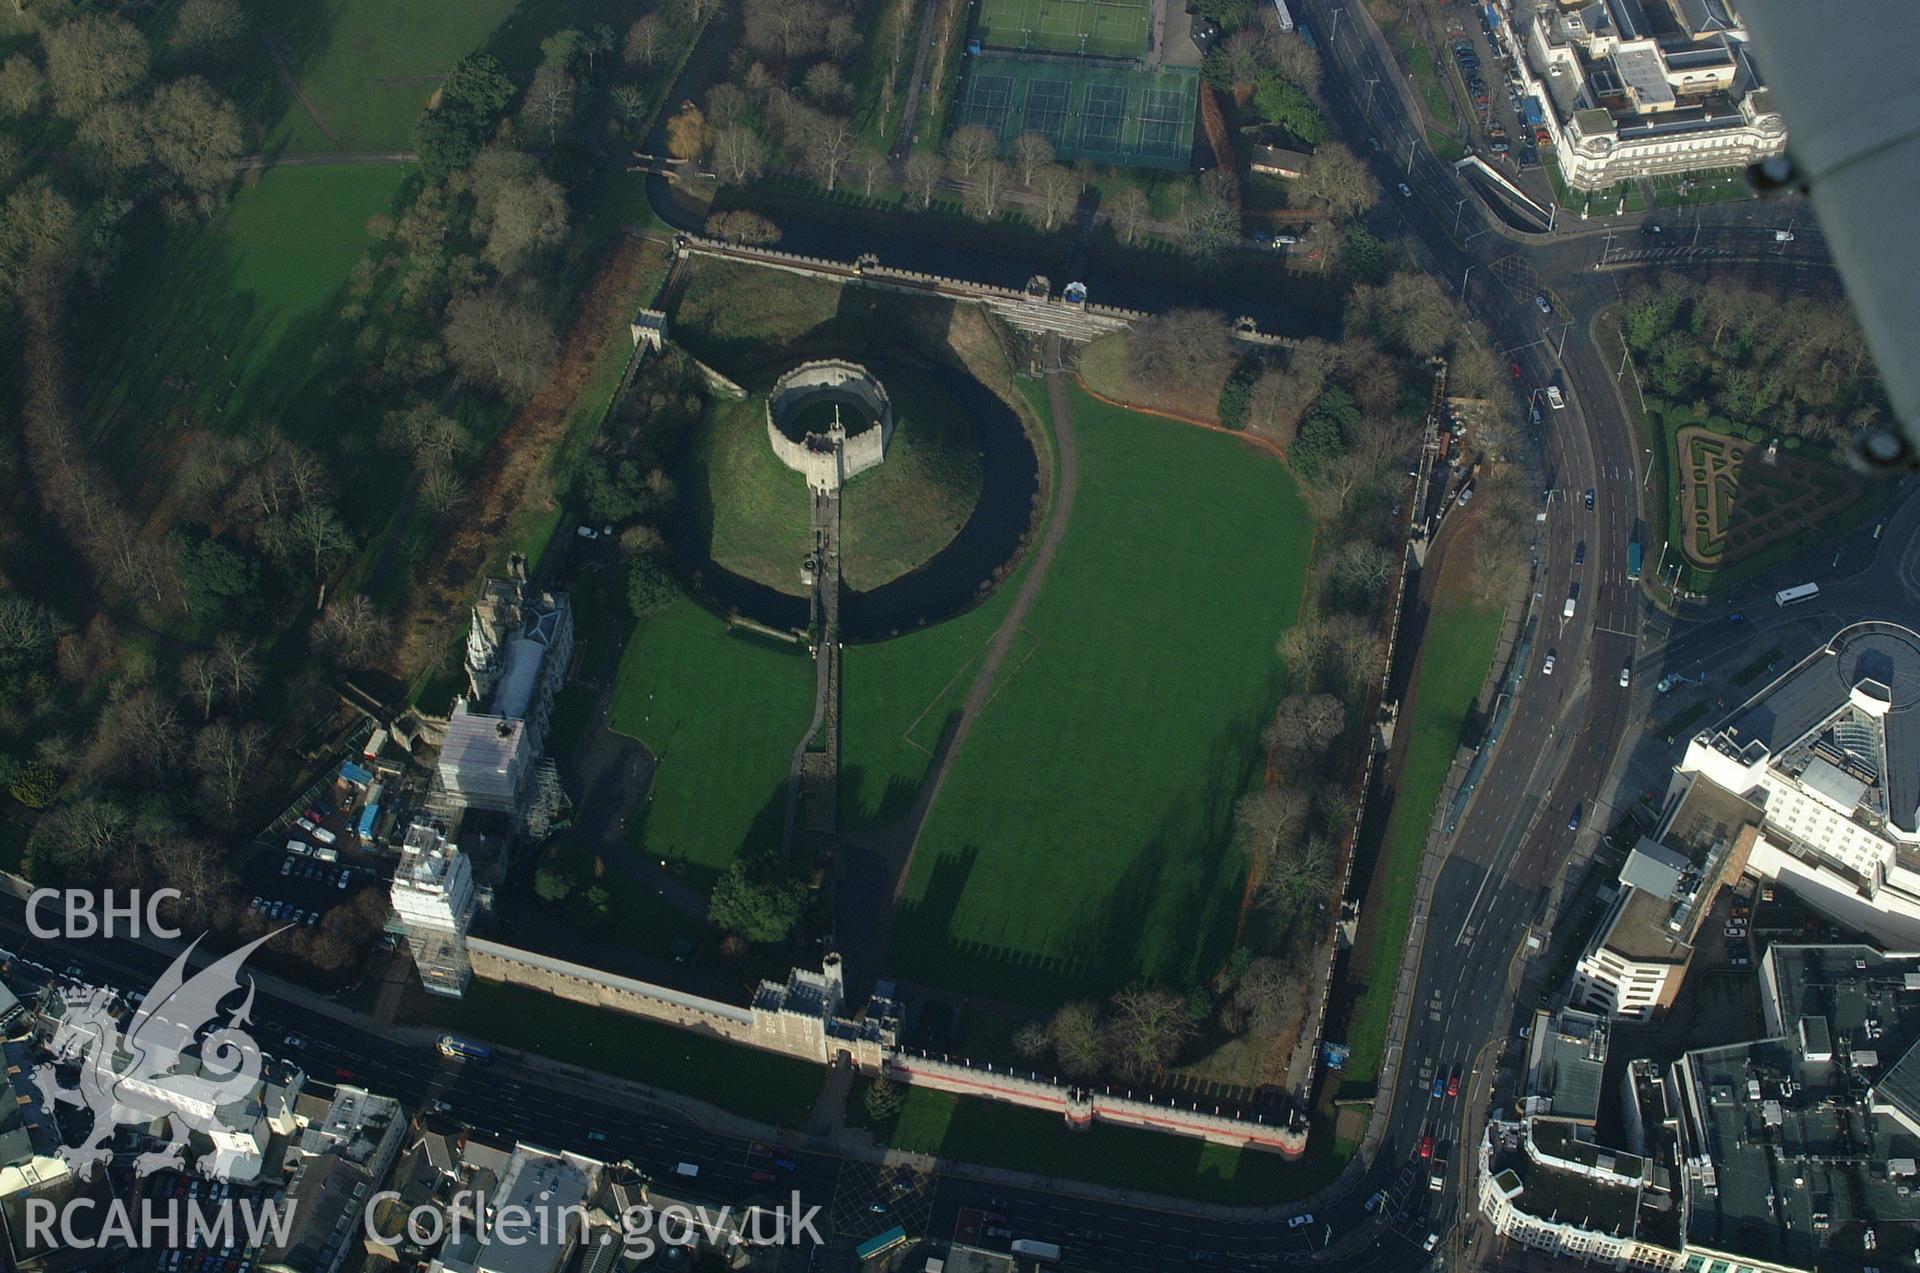 RCAHMW colour oblique aerial photograph of Cardiff Castle taken on 13/01/2005 by Toby Driver